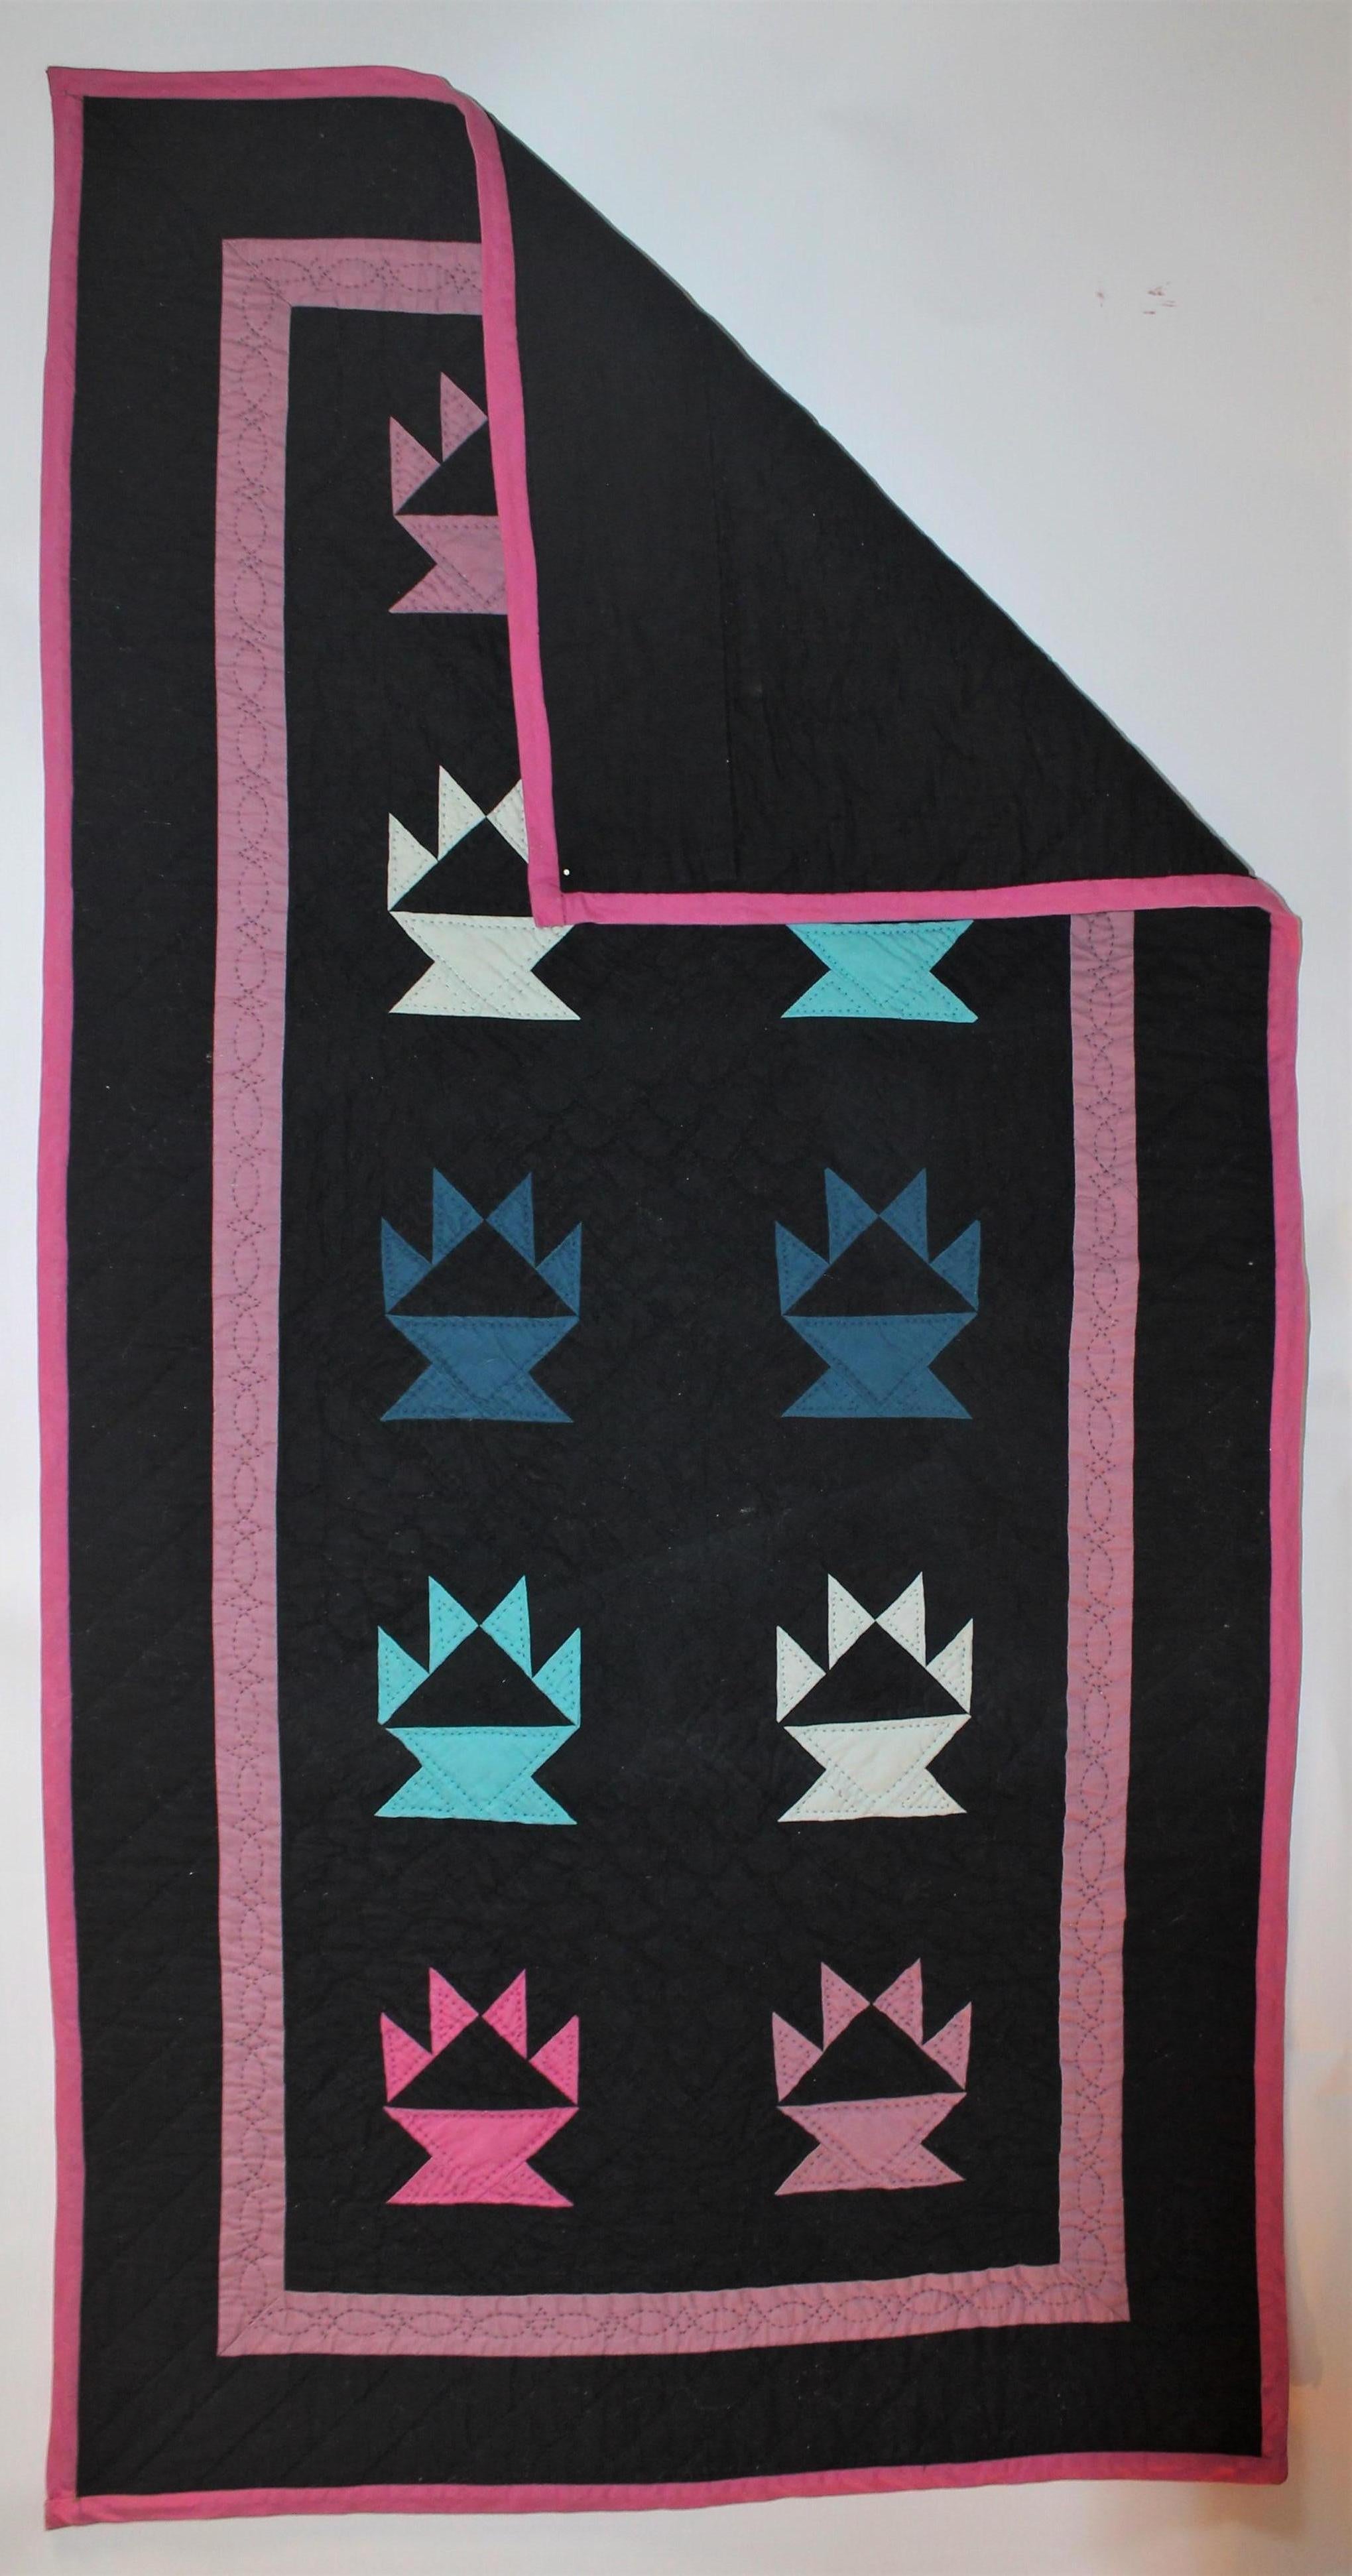 This is such a rarity crib or cradle quilt from Holmes County, Ohio. These gem tone colors on a black cotton ground and such nice quilting and piecing. The condition is pristine.